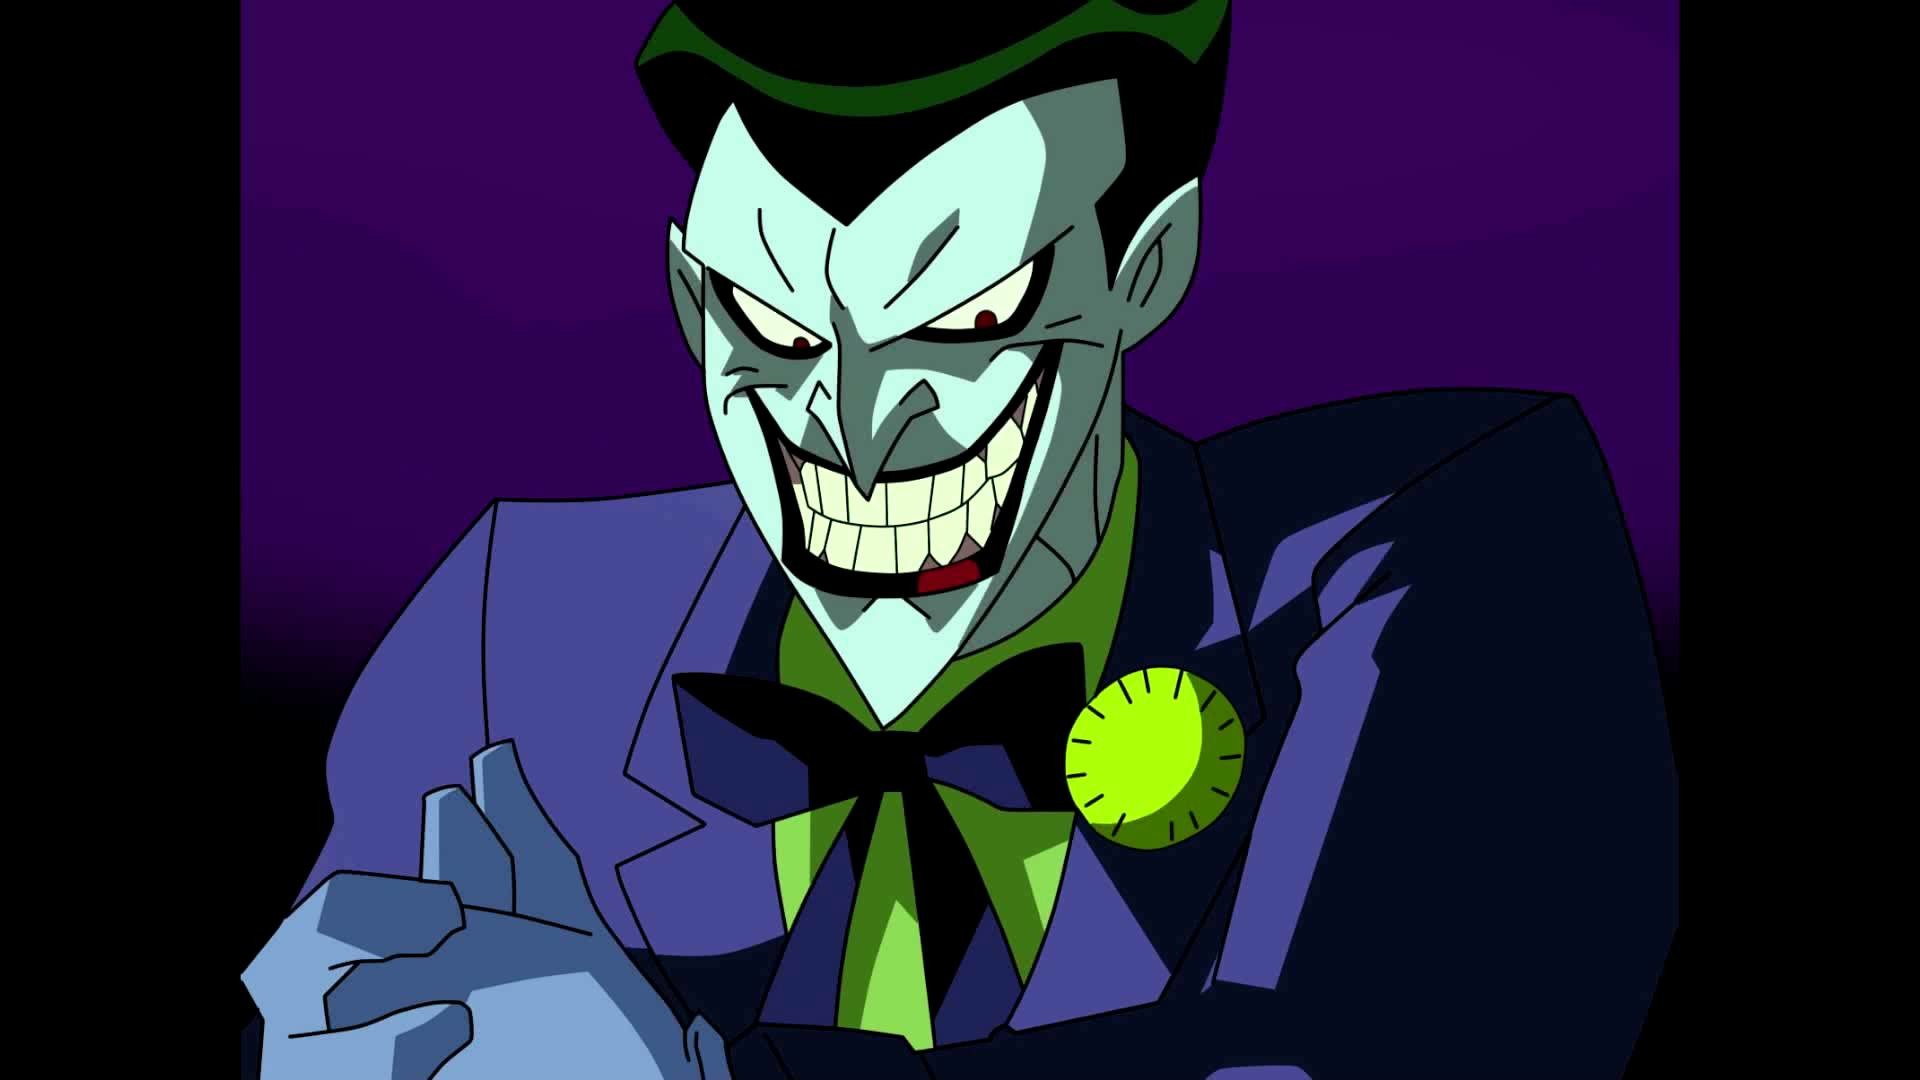 1920x1080 the joker as played by mark hamill